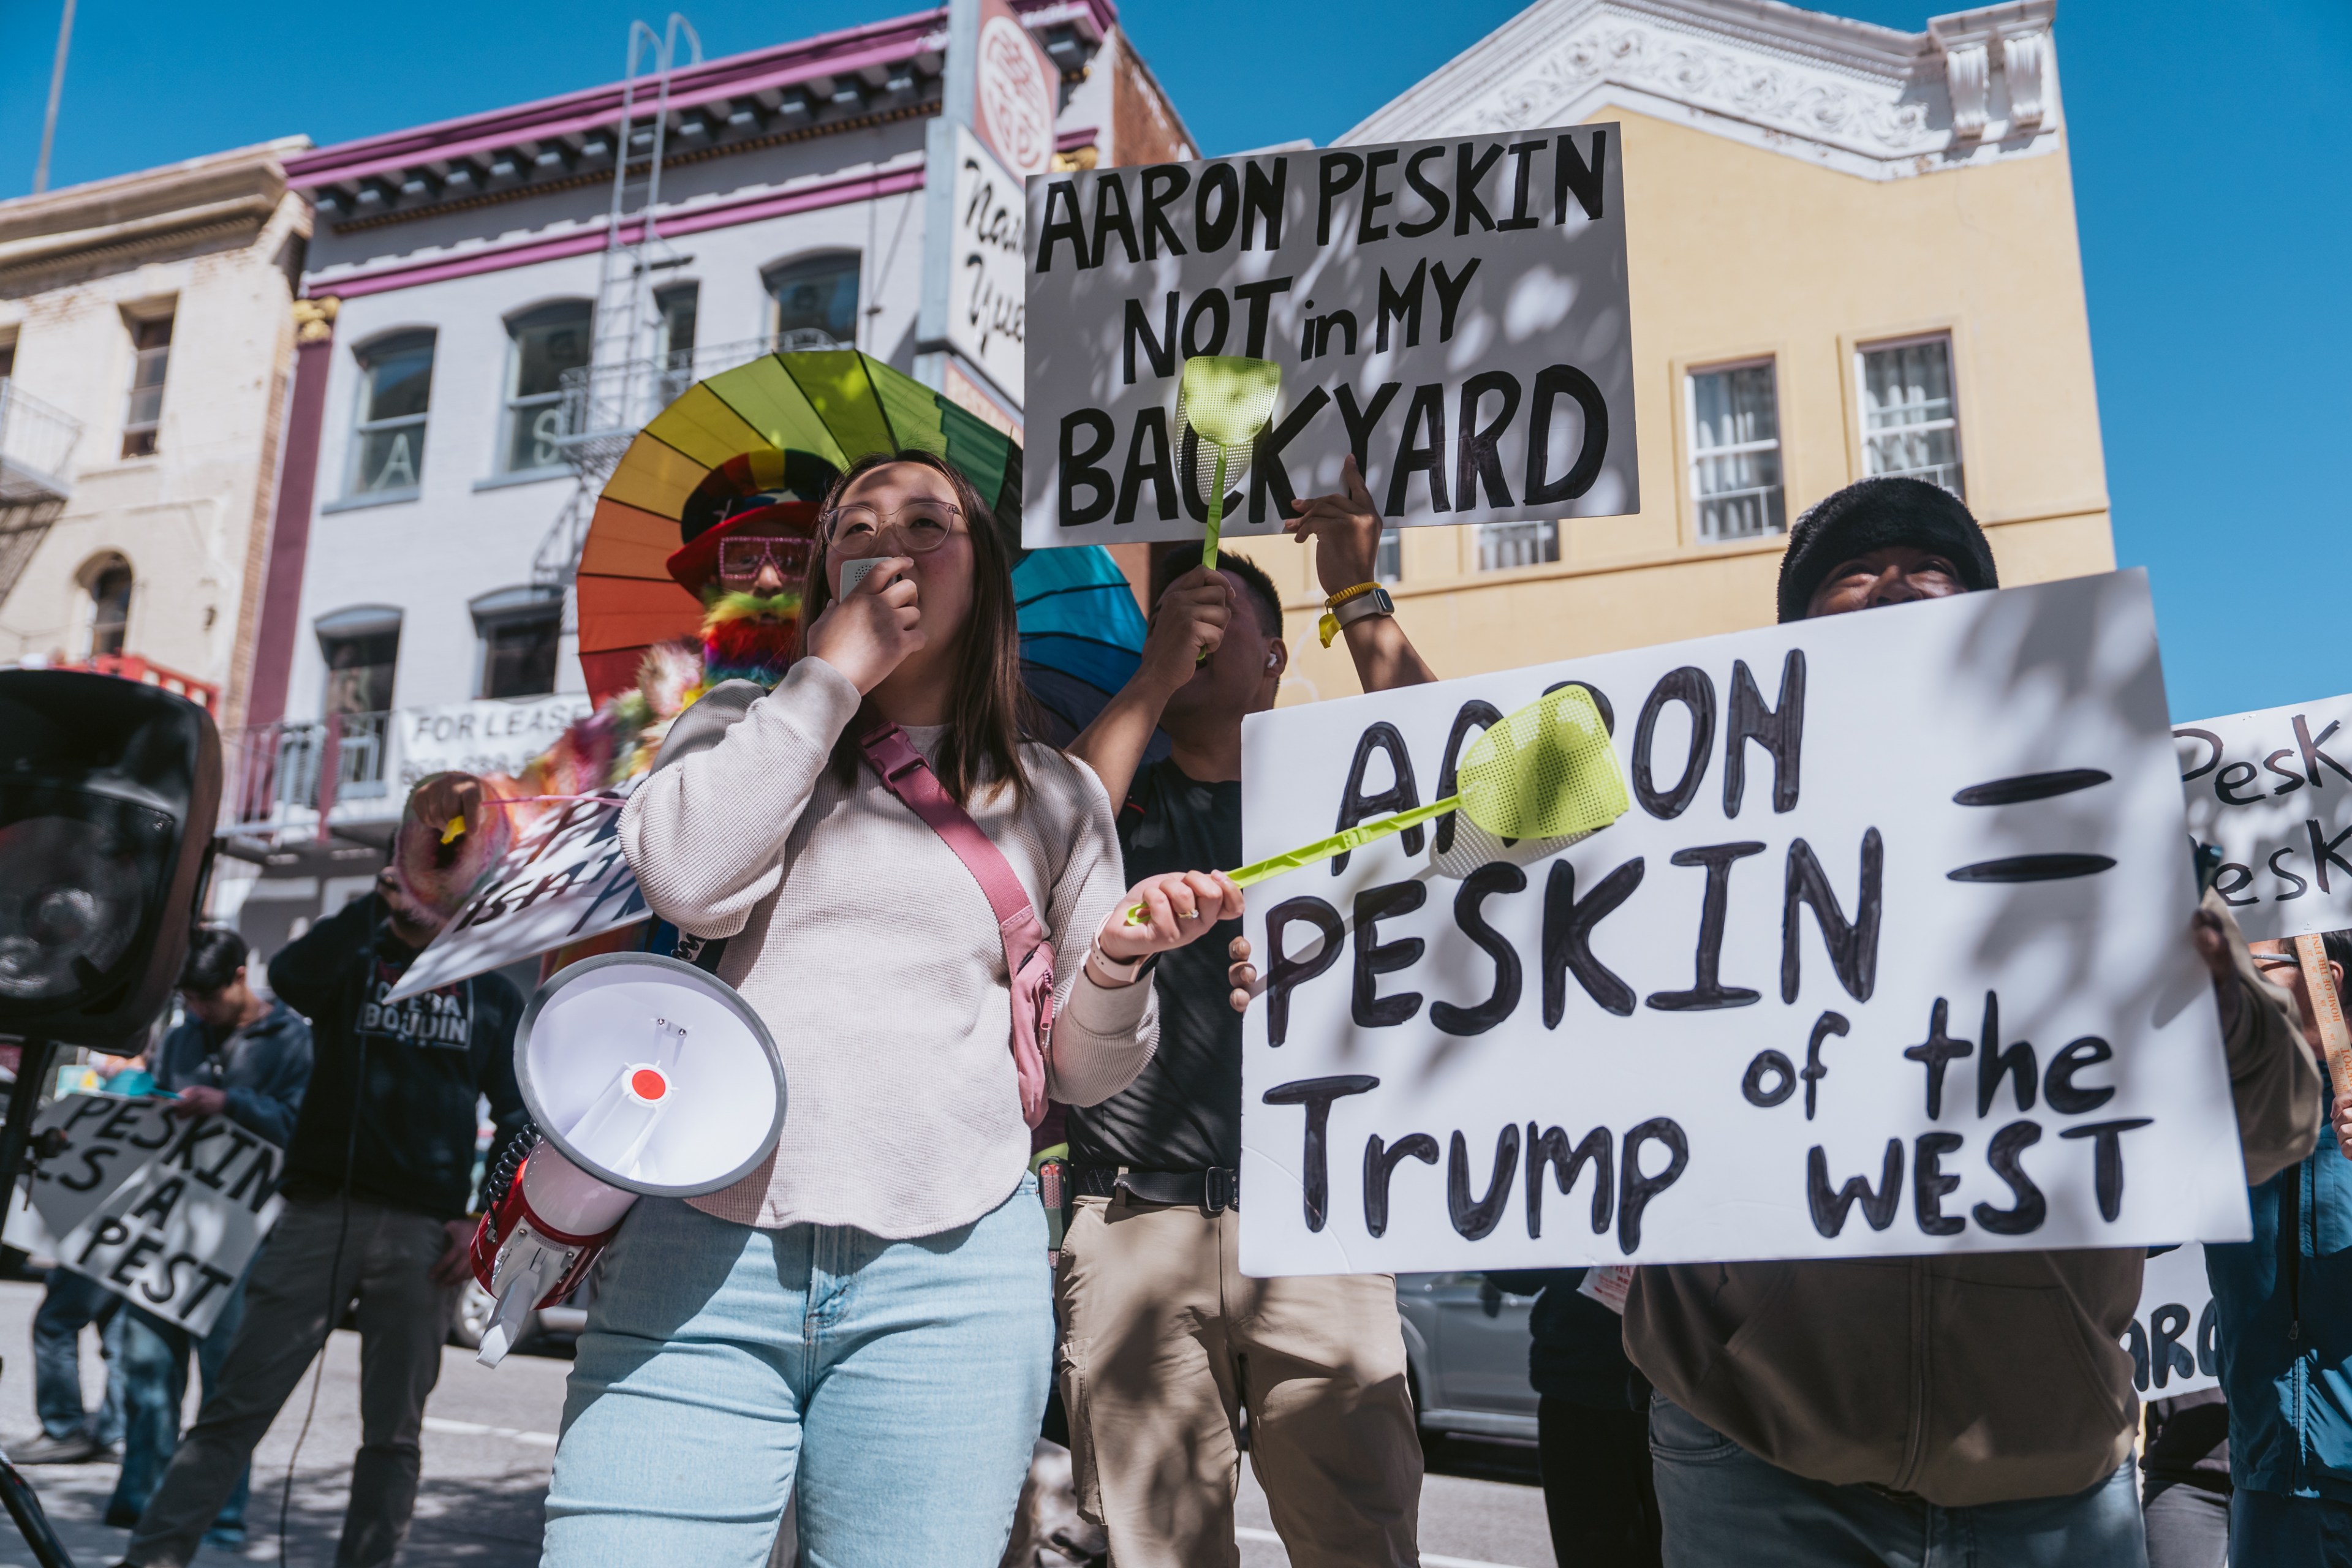 Protesters with signs that equate a person named Aaron Peskin with negativity and rebuke.